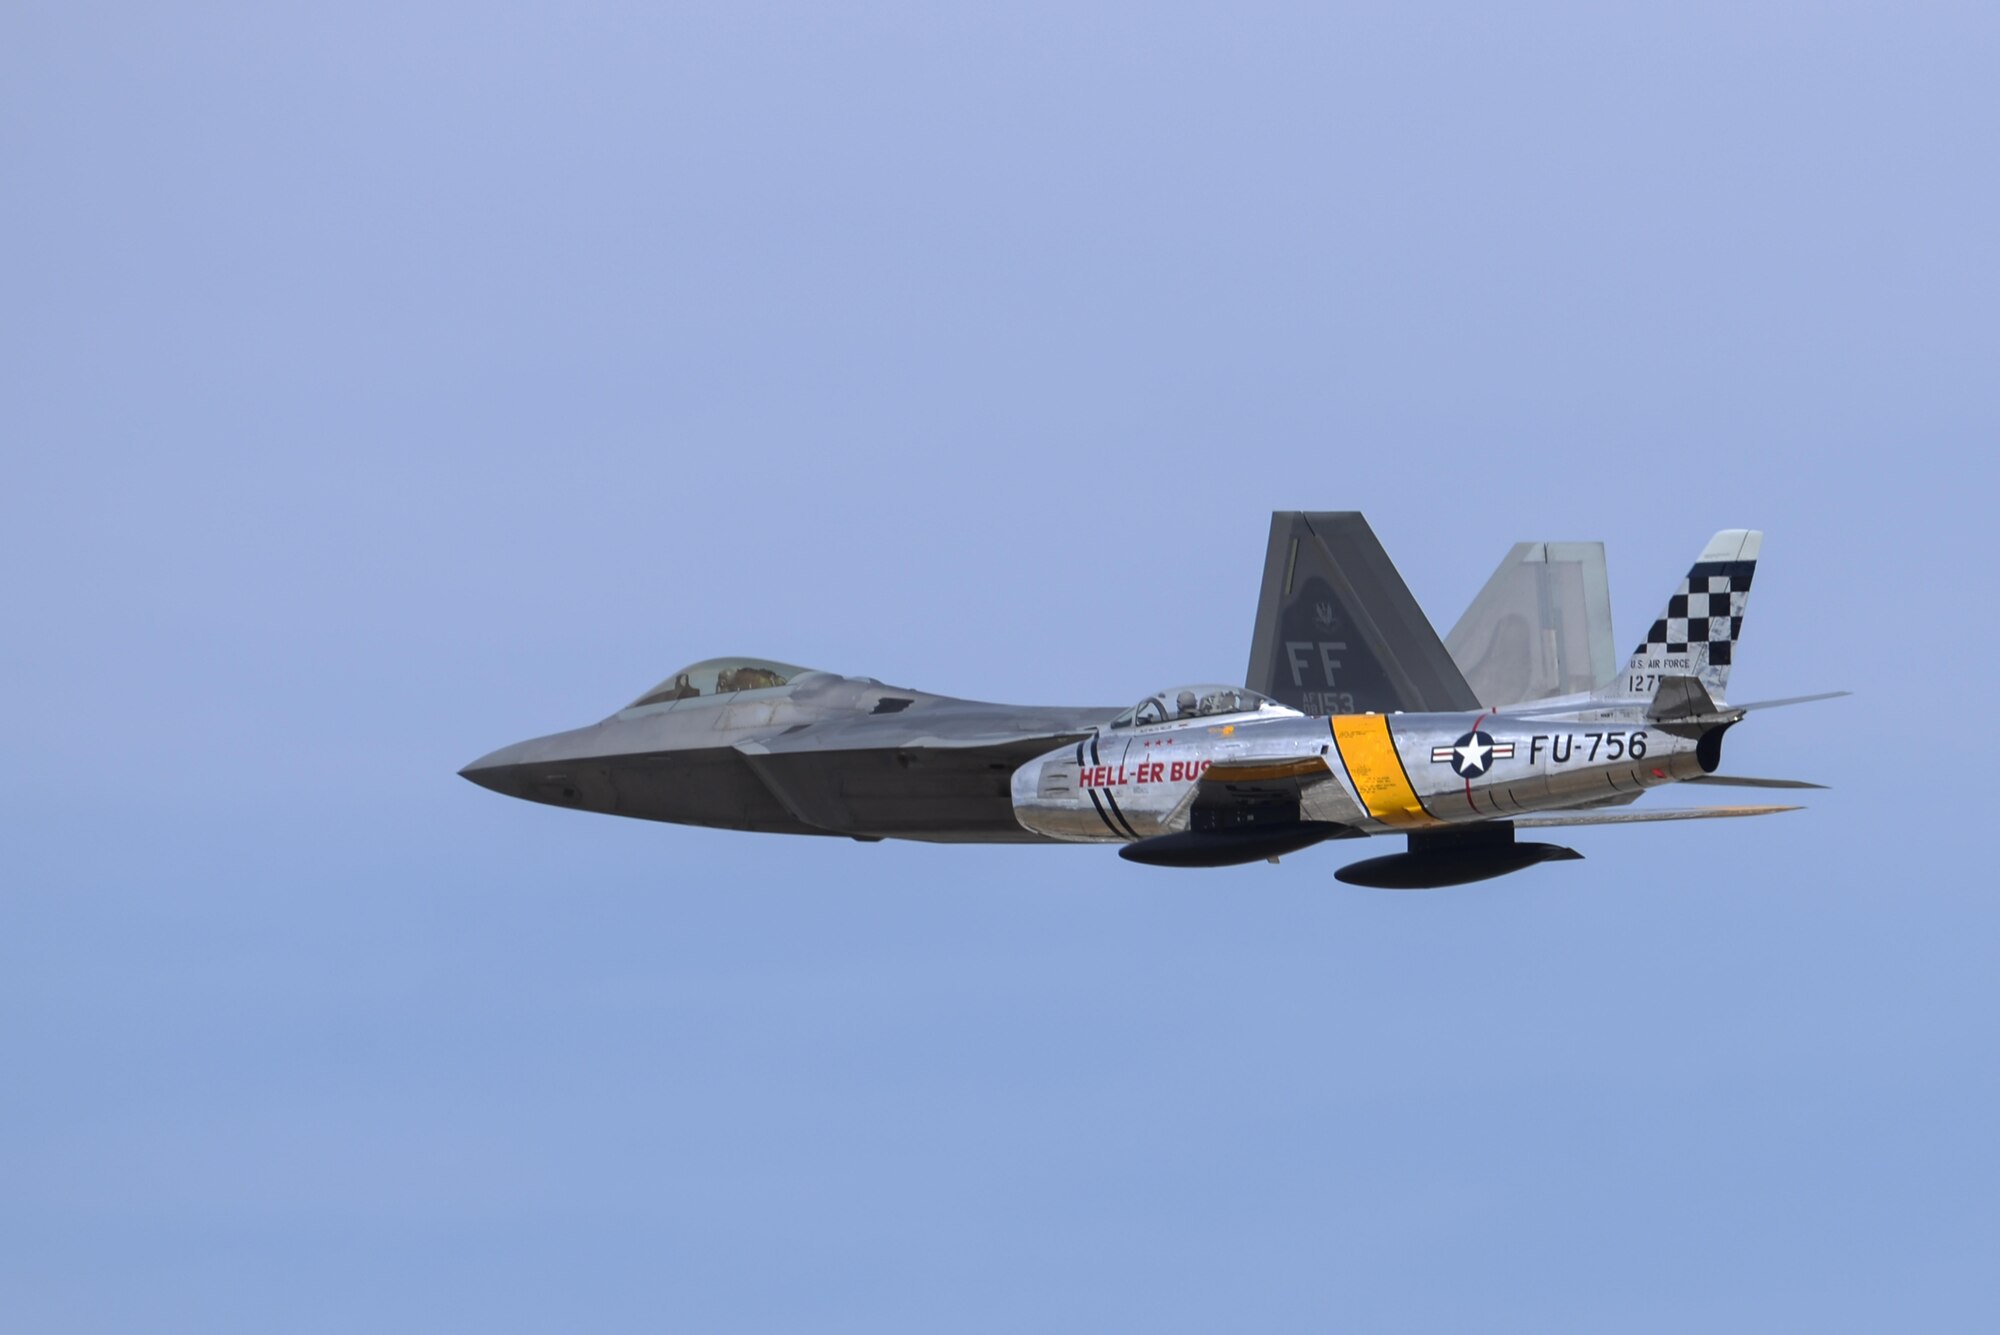 An F-22 Raptor and an F-86 Sabre fly in formation during the 2016 Heritage Flight Training and Certification Course at Davis-Monthan Air Force Base, Ariz., March 6, 2016. Established in 1997, the HFTCC certifies civilian pilots of historic military aircraft and U.S. Air Force pilots to fly in formation together during the upcoming air show season. (U.S. Air Force photo by Senior Airman Chris Massey/Released)